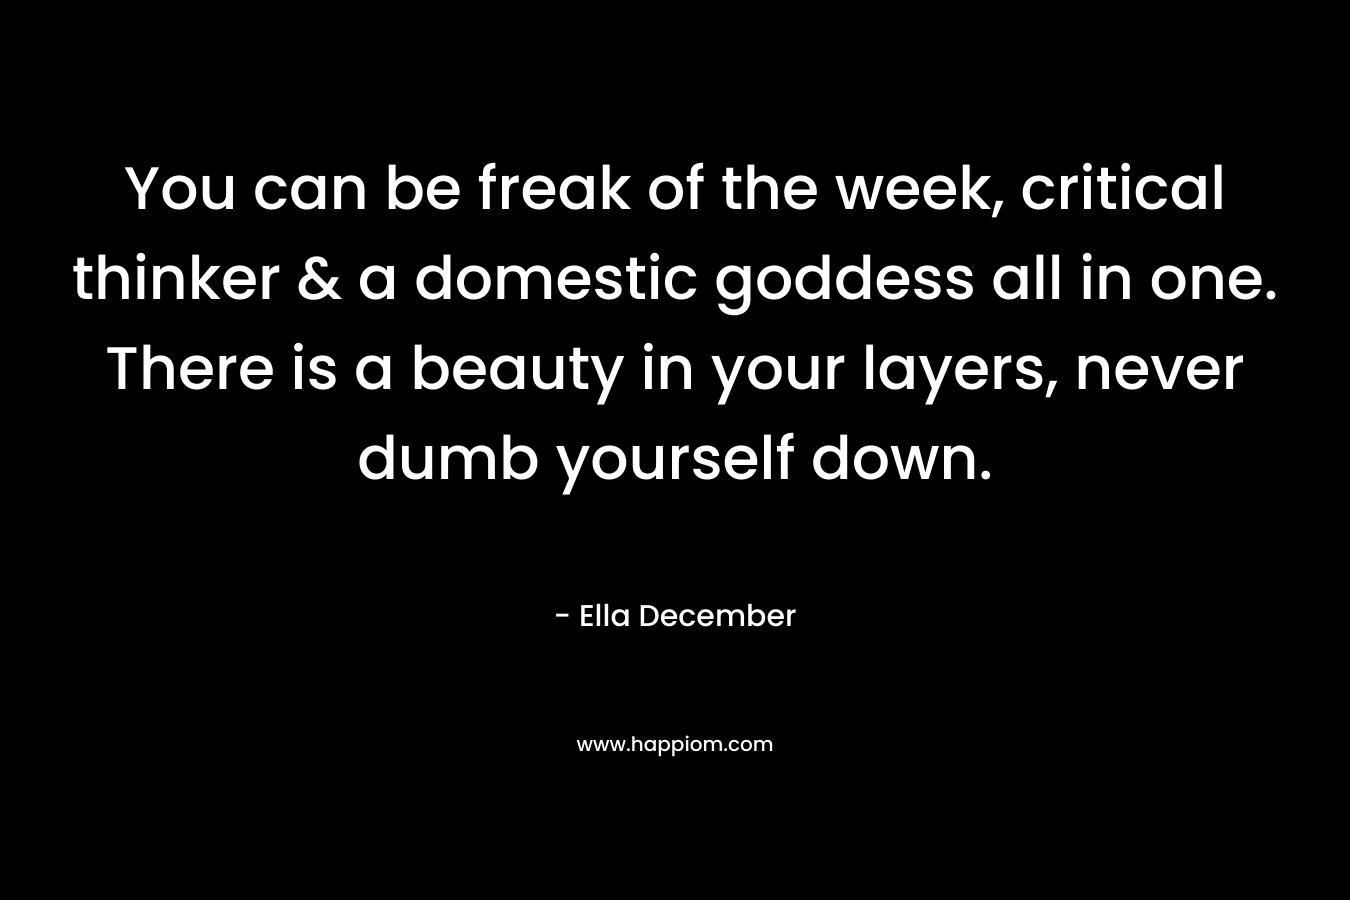 You can be freak of the week, critical thinker & a domestic goddess all in one. There is a beauty in your layers, never dumb yourself down. – Ella December